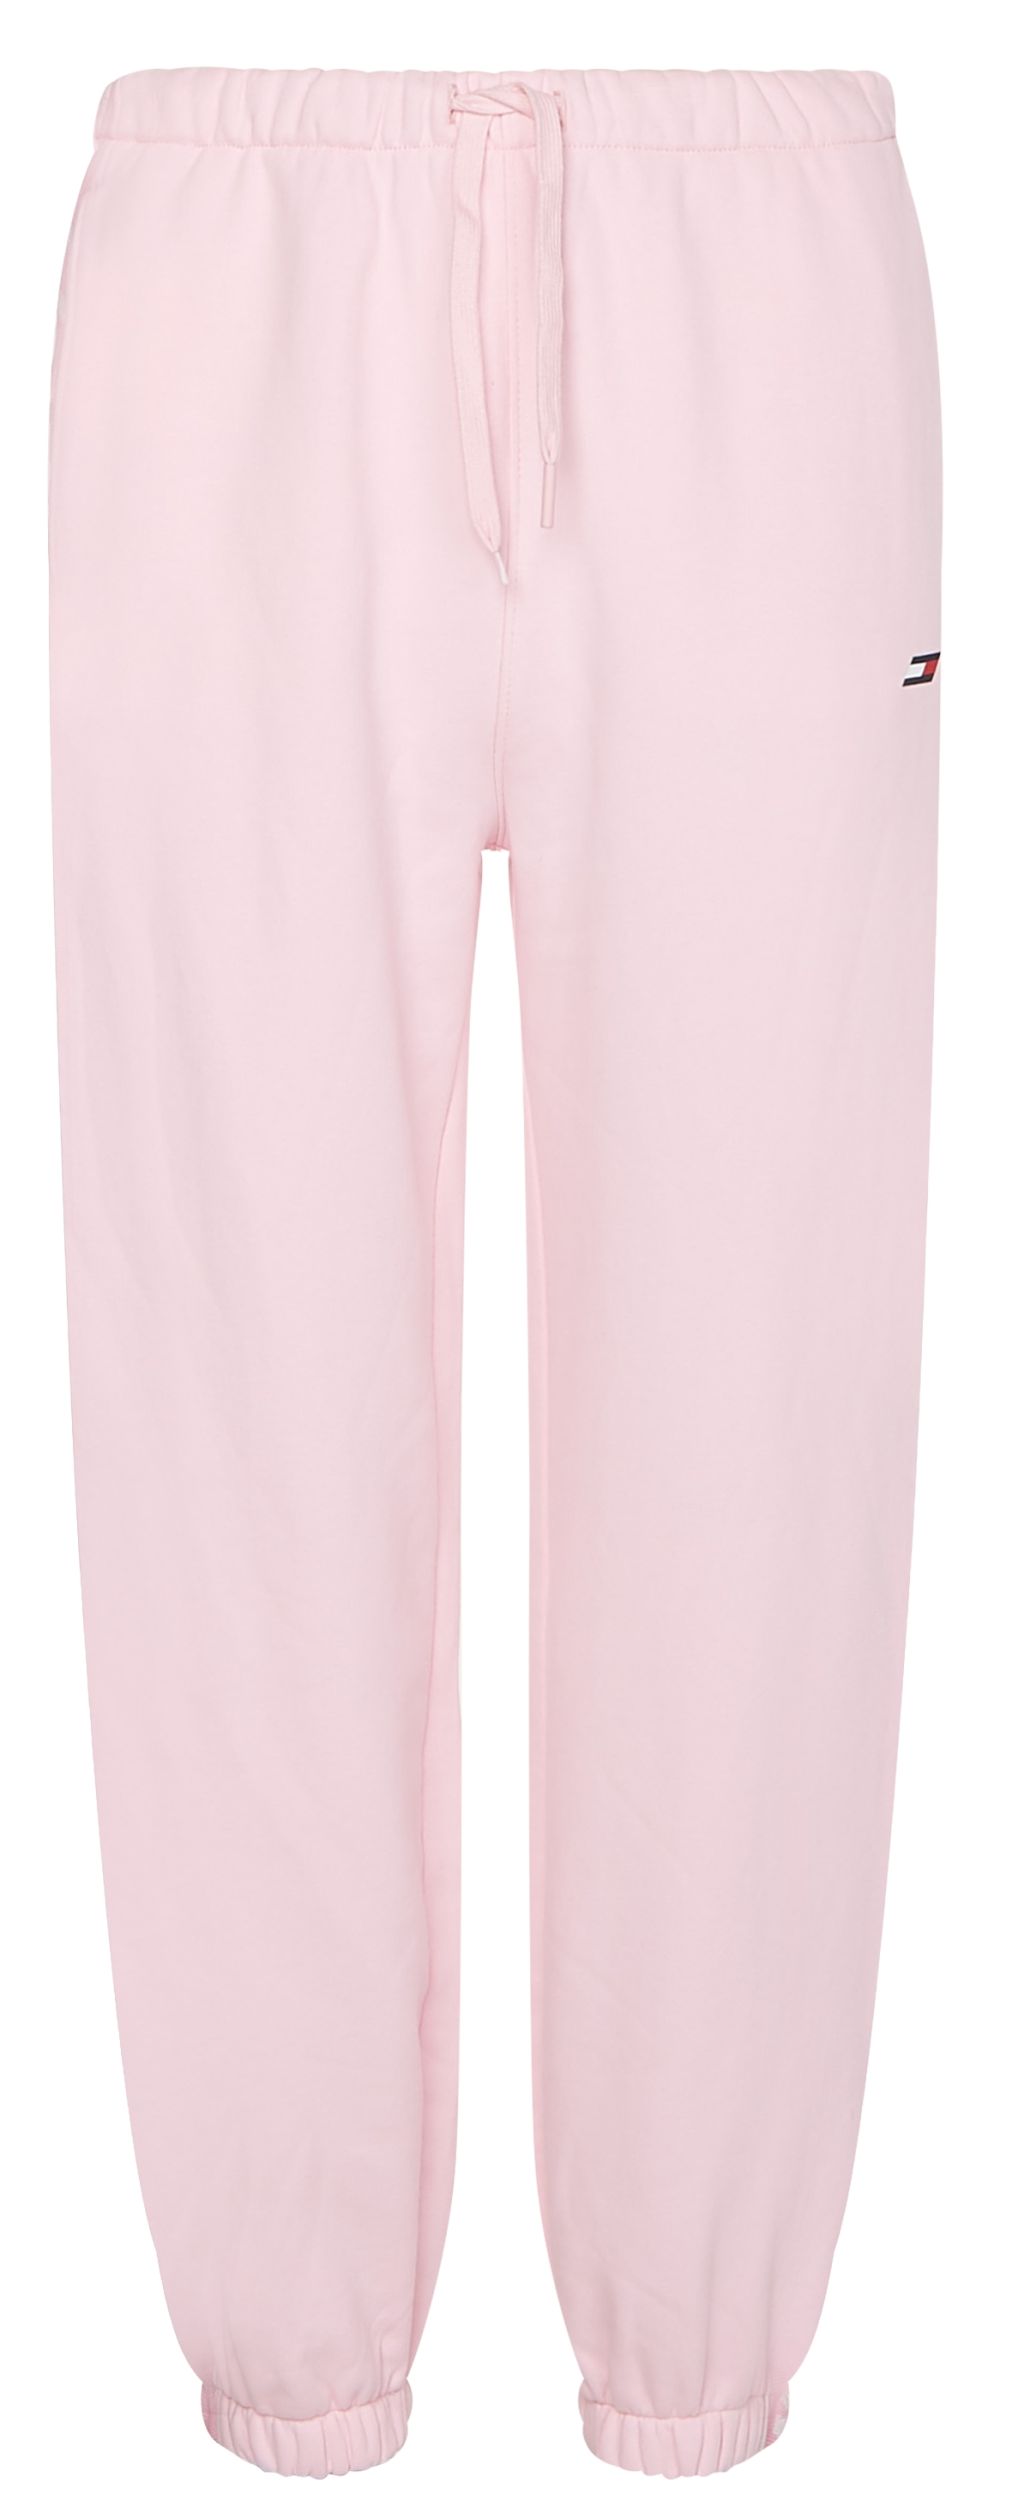 Women's trousers Tommy Hilfiger Relaxed Branded Sweatpant - pastel